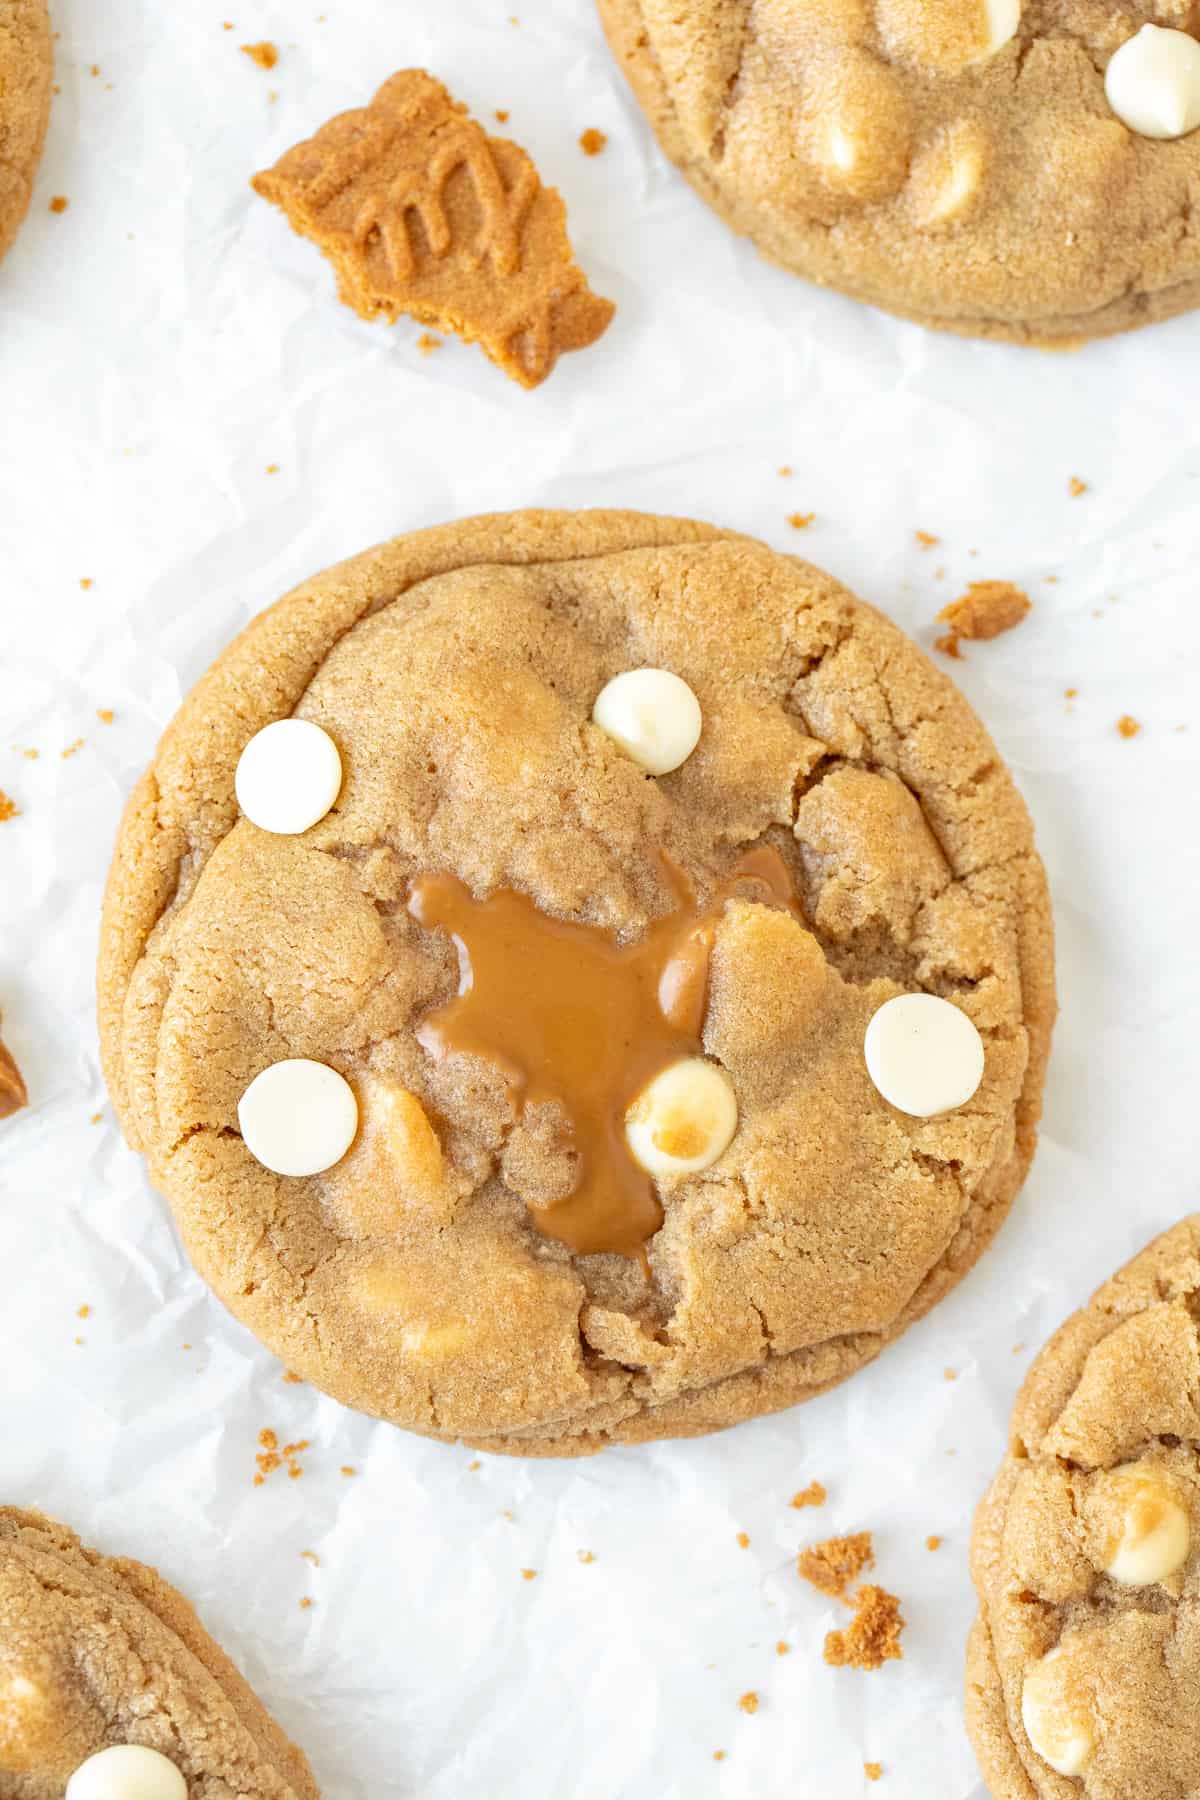 Biscoff stuffed cookie with white chocolate chips, from above